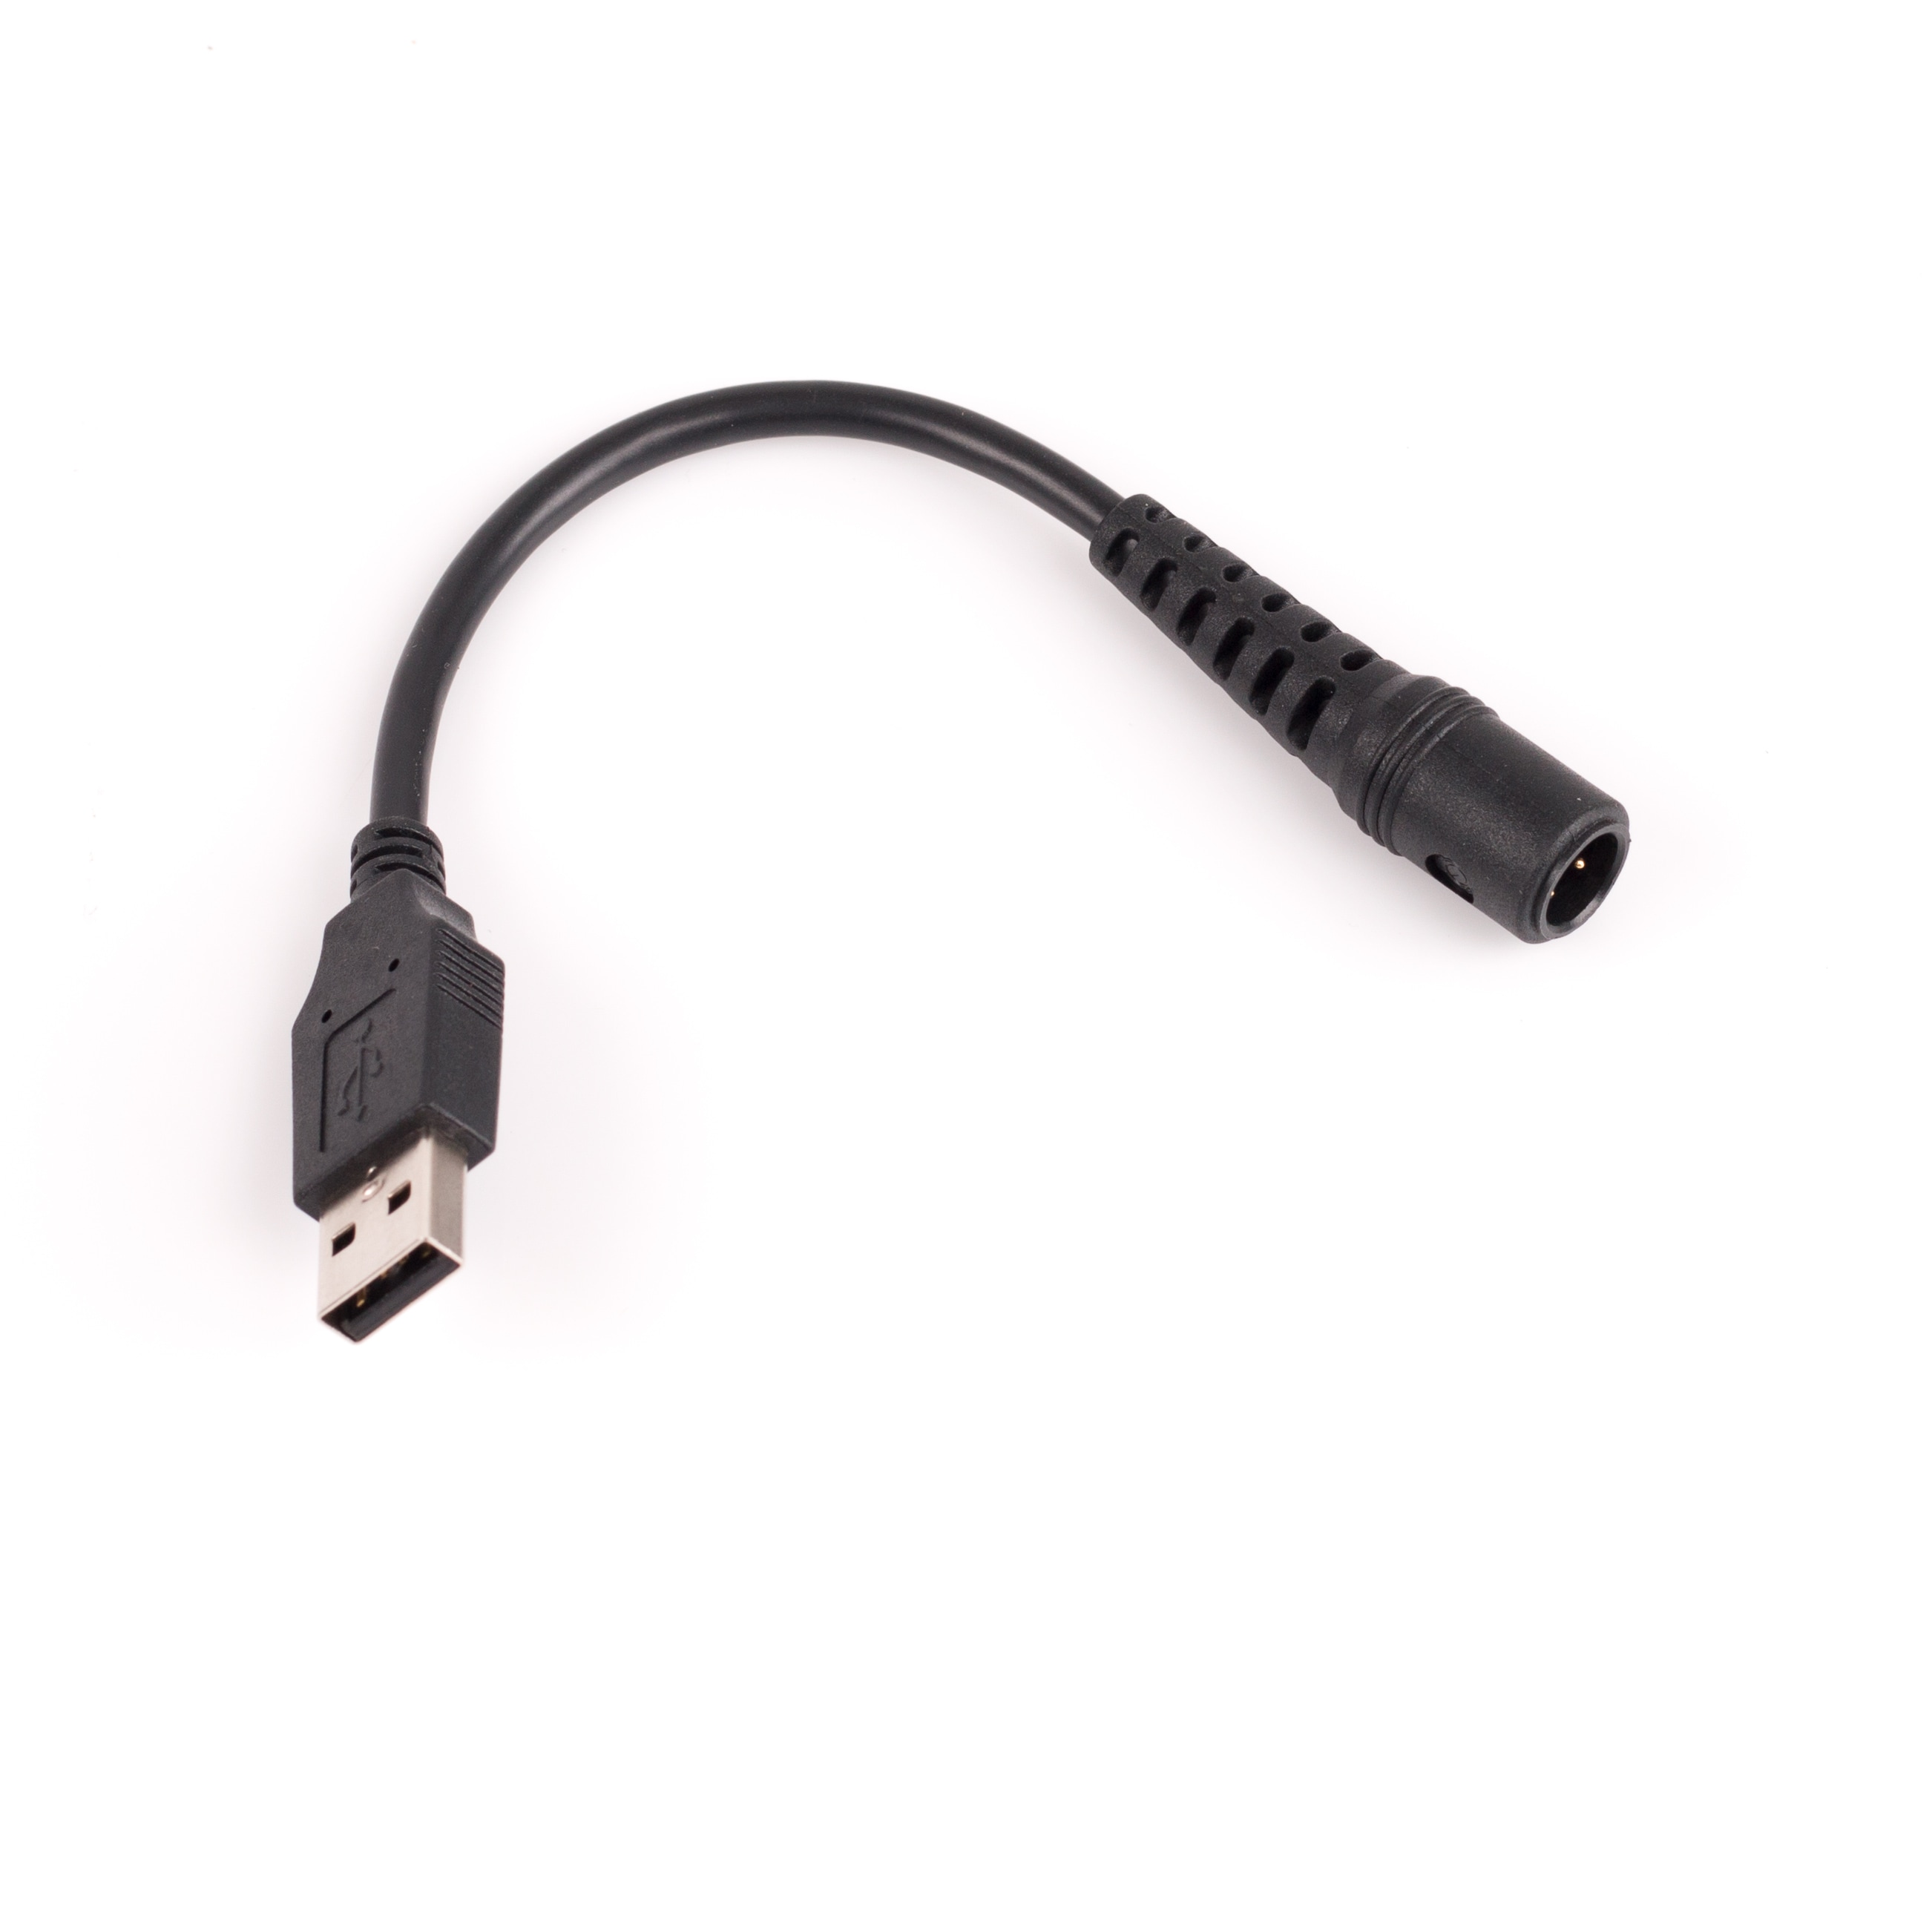 USB Cable for Flash Key